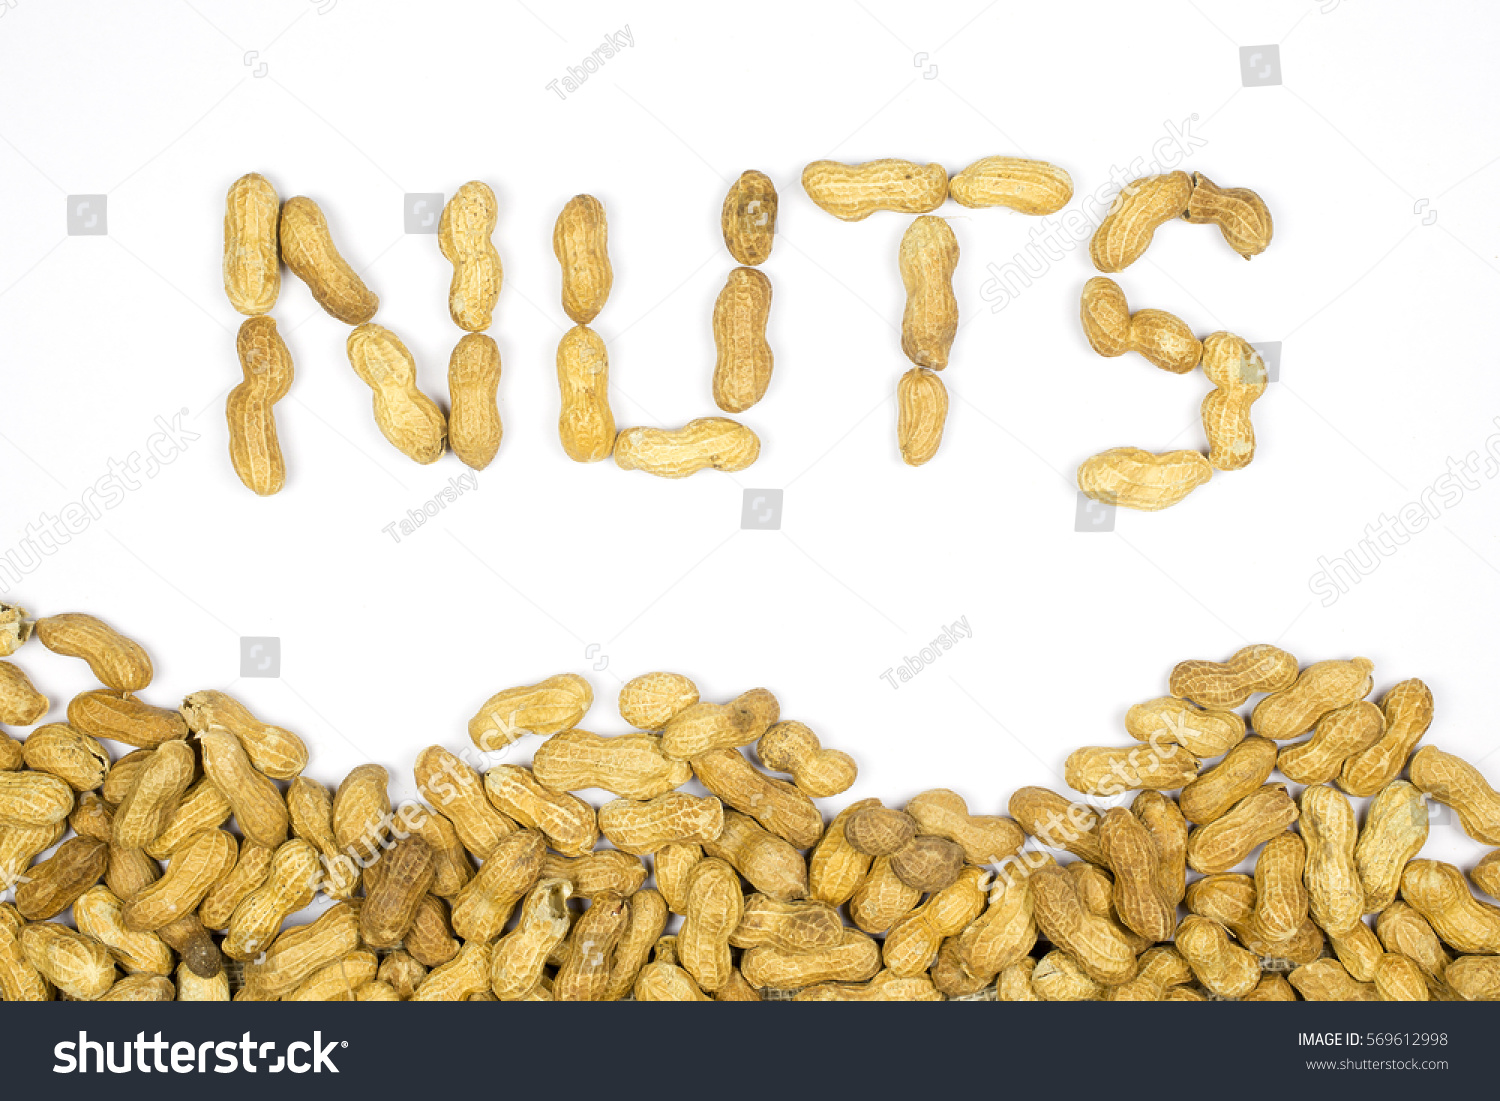 Peanuts on a white background, sign NUTs #569612998